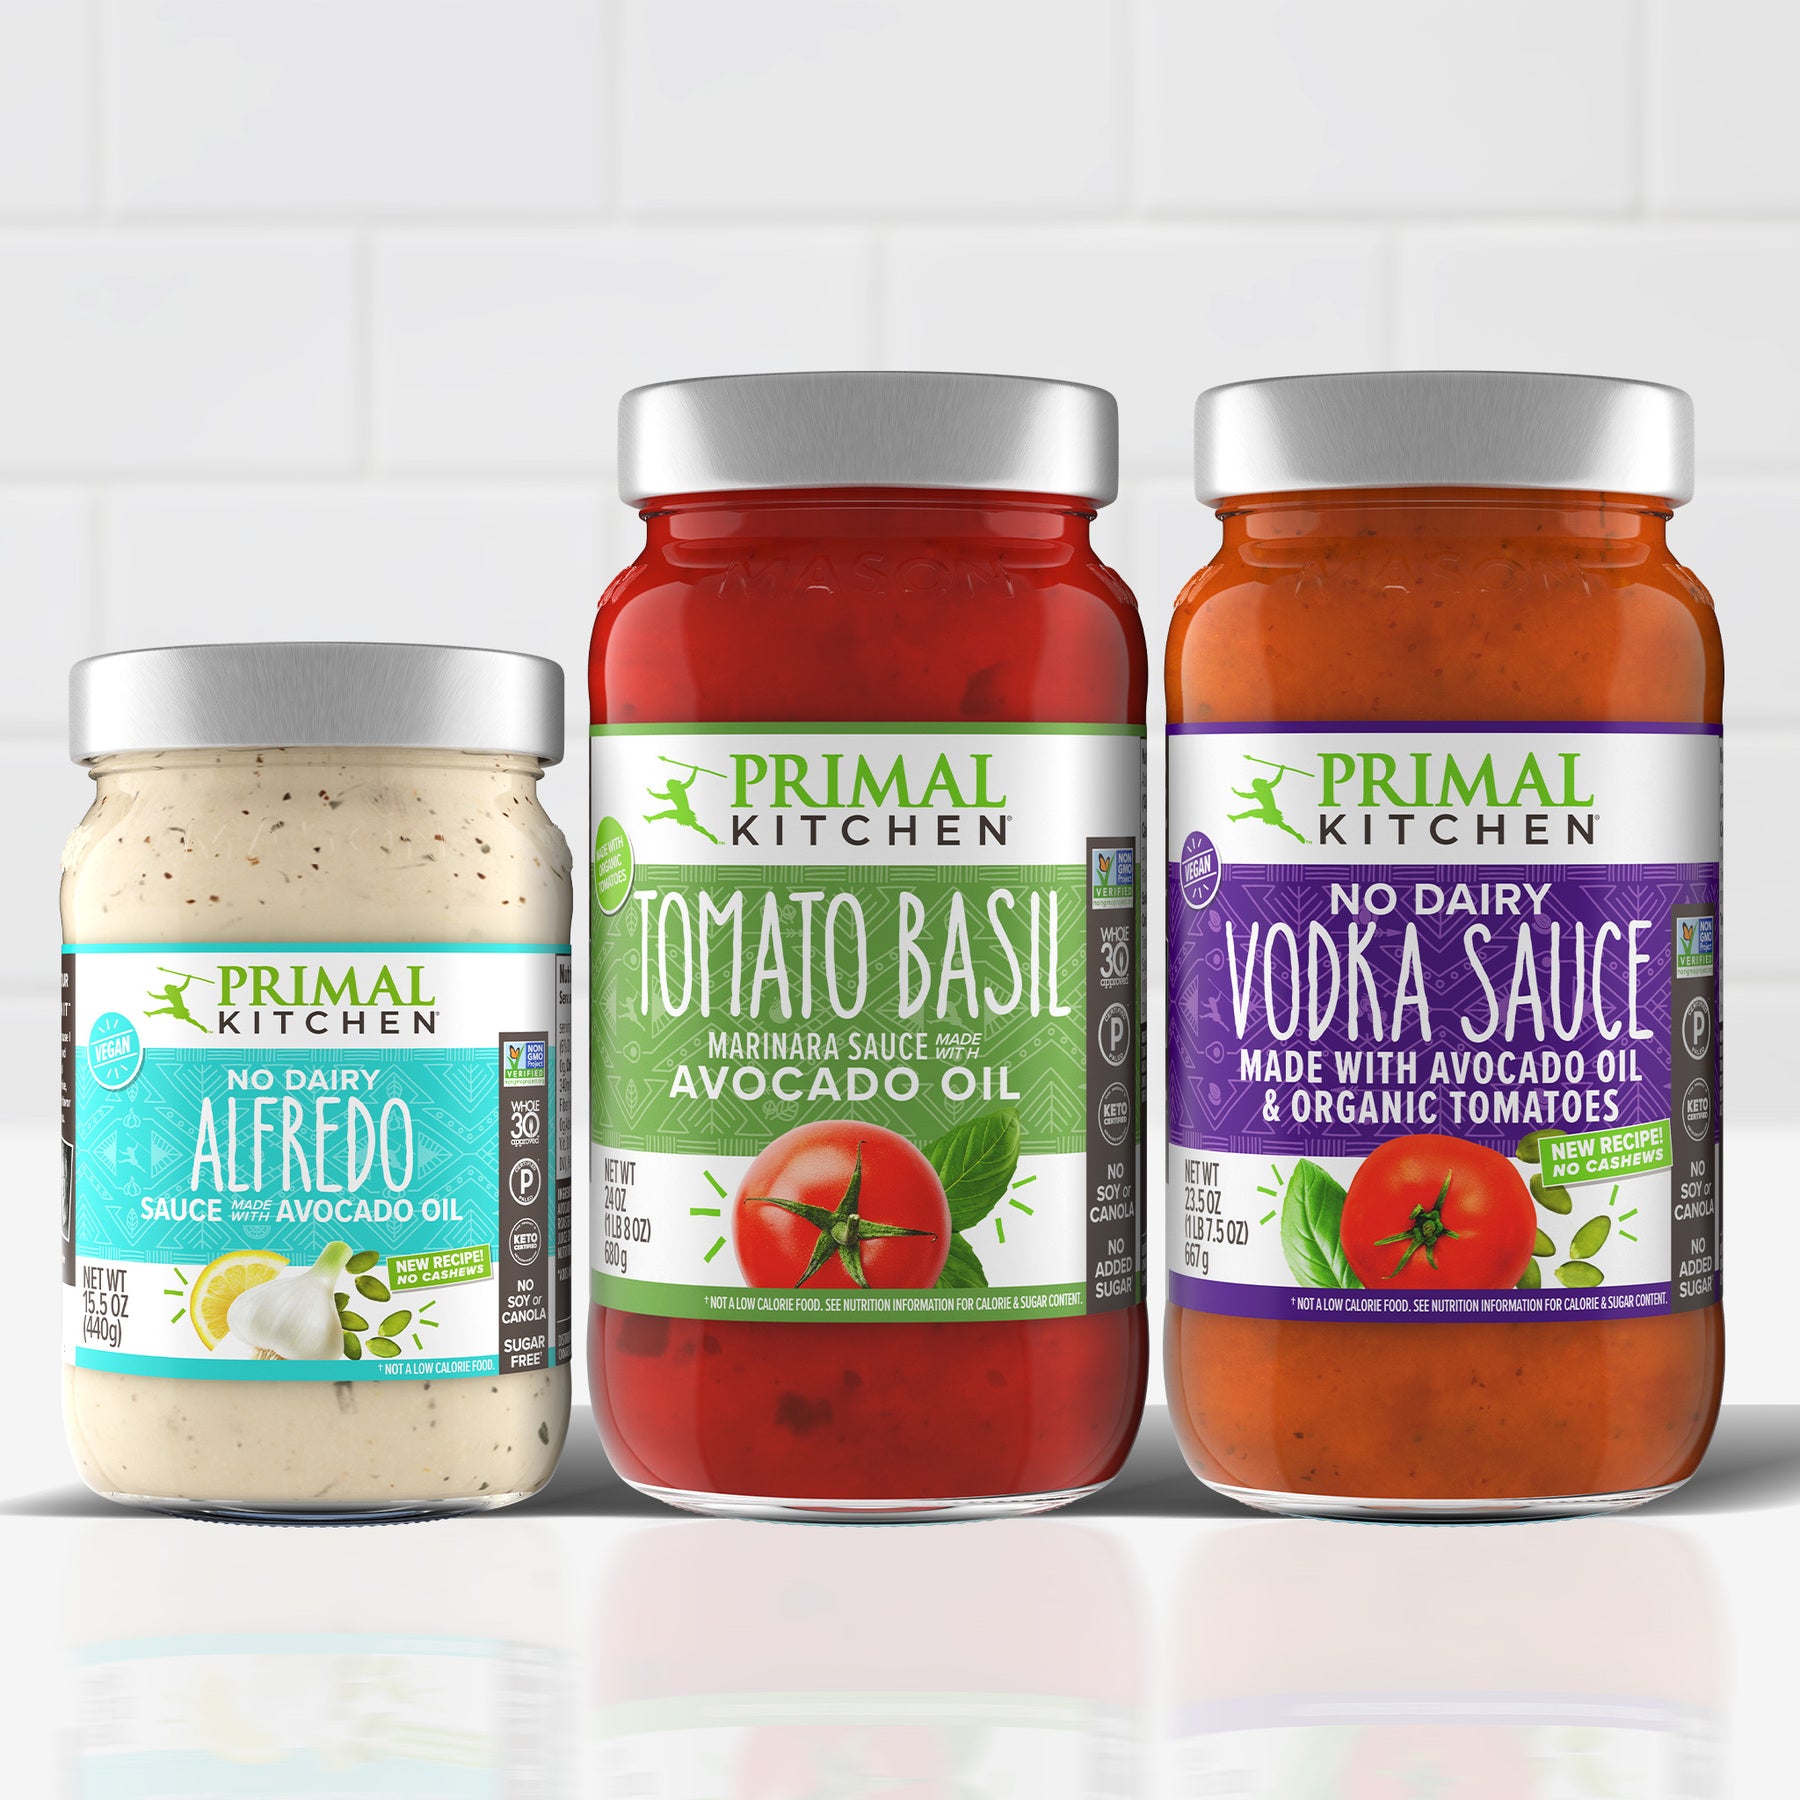 Jars of Primal Kitchen No Dairy Alfredo Sauce, Primal Kitchen Tomato Basil Marinara Sauce, and Primal Kitchen No Dairy Vodka Sauce Made with Avocado Oil and Organic Tomatoes lined up on a white countertop, with a white tile background. 